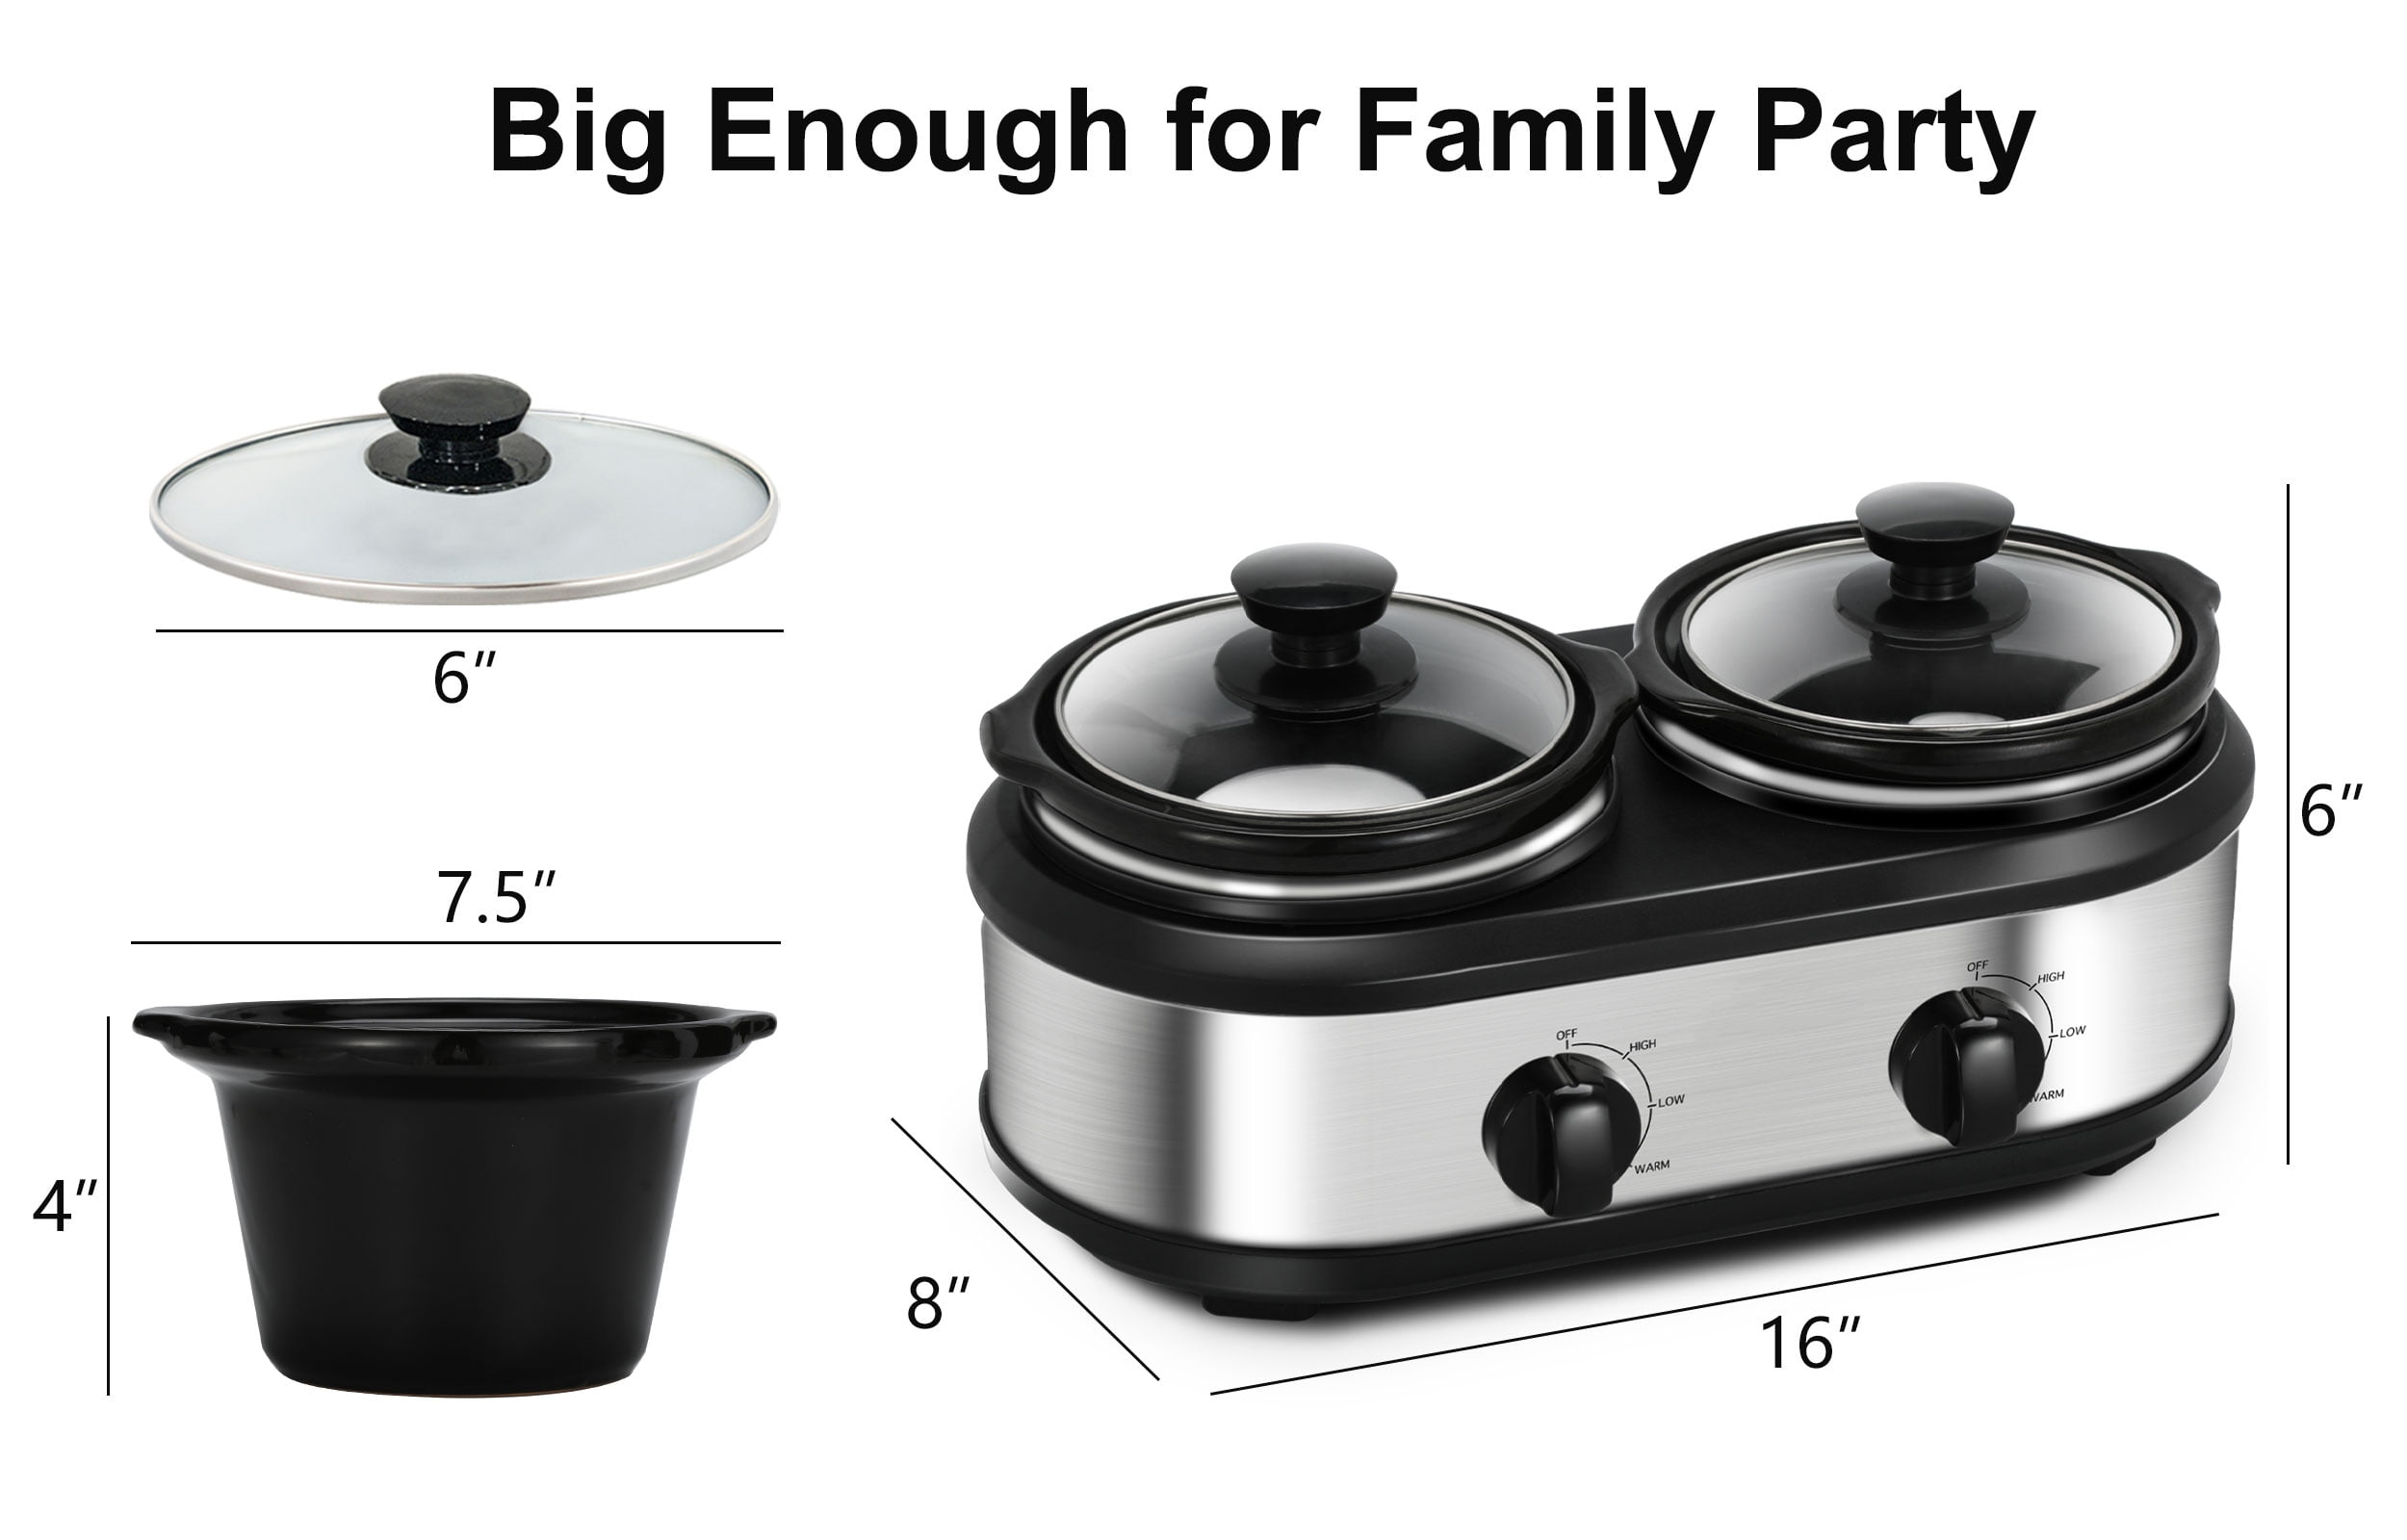 Heynemo Double Slow Cooker Buffet Servers and Food Warmers 2 x 1.25 QT